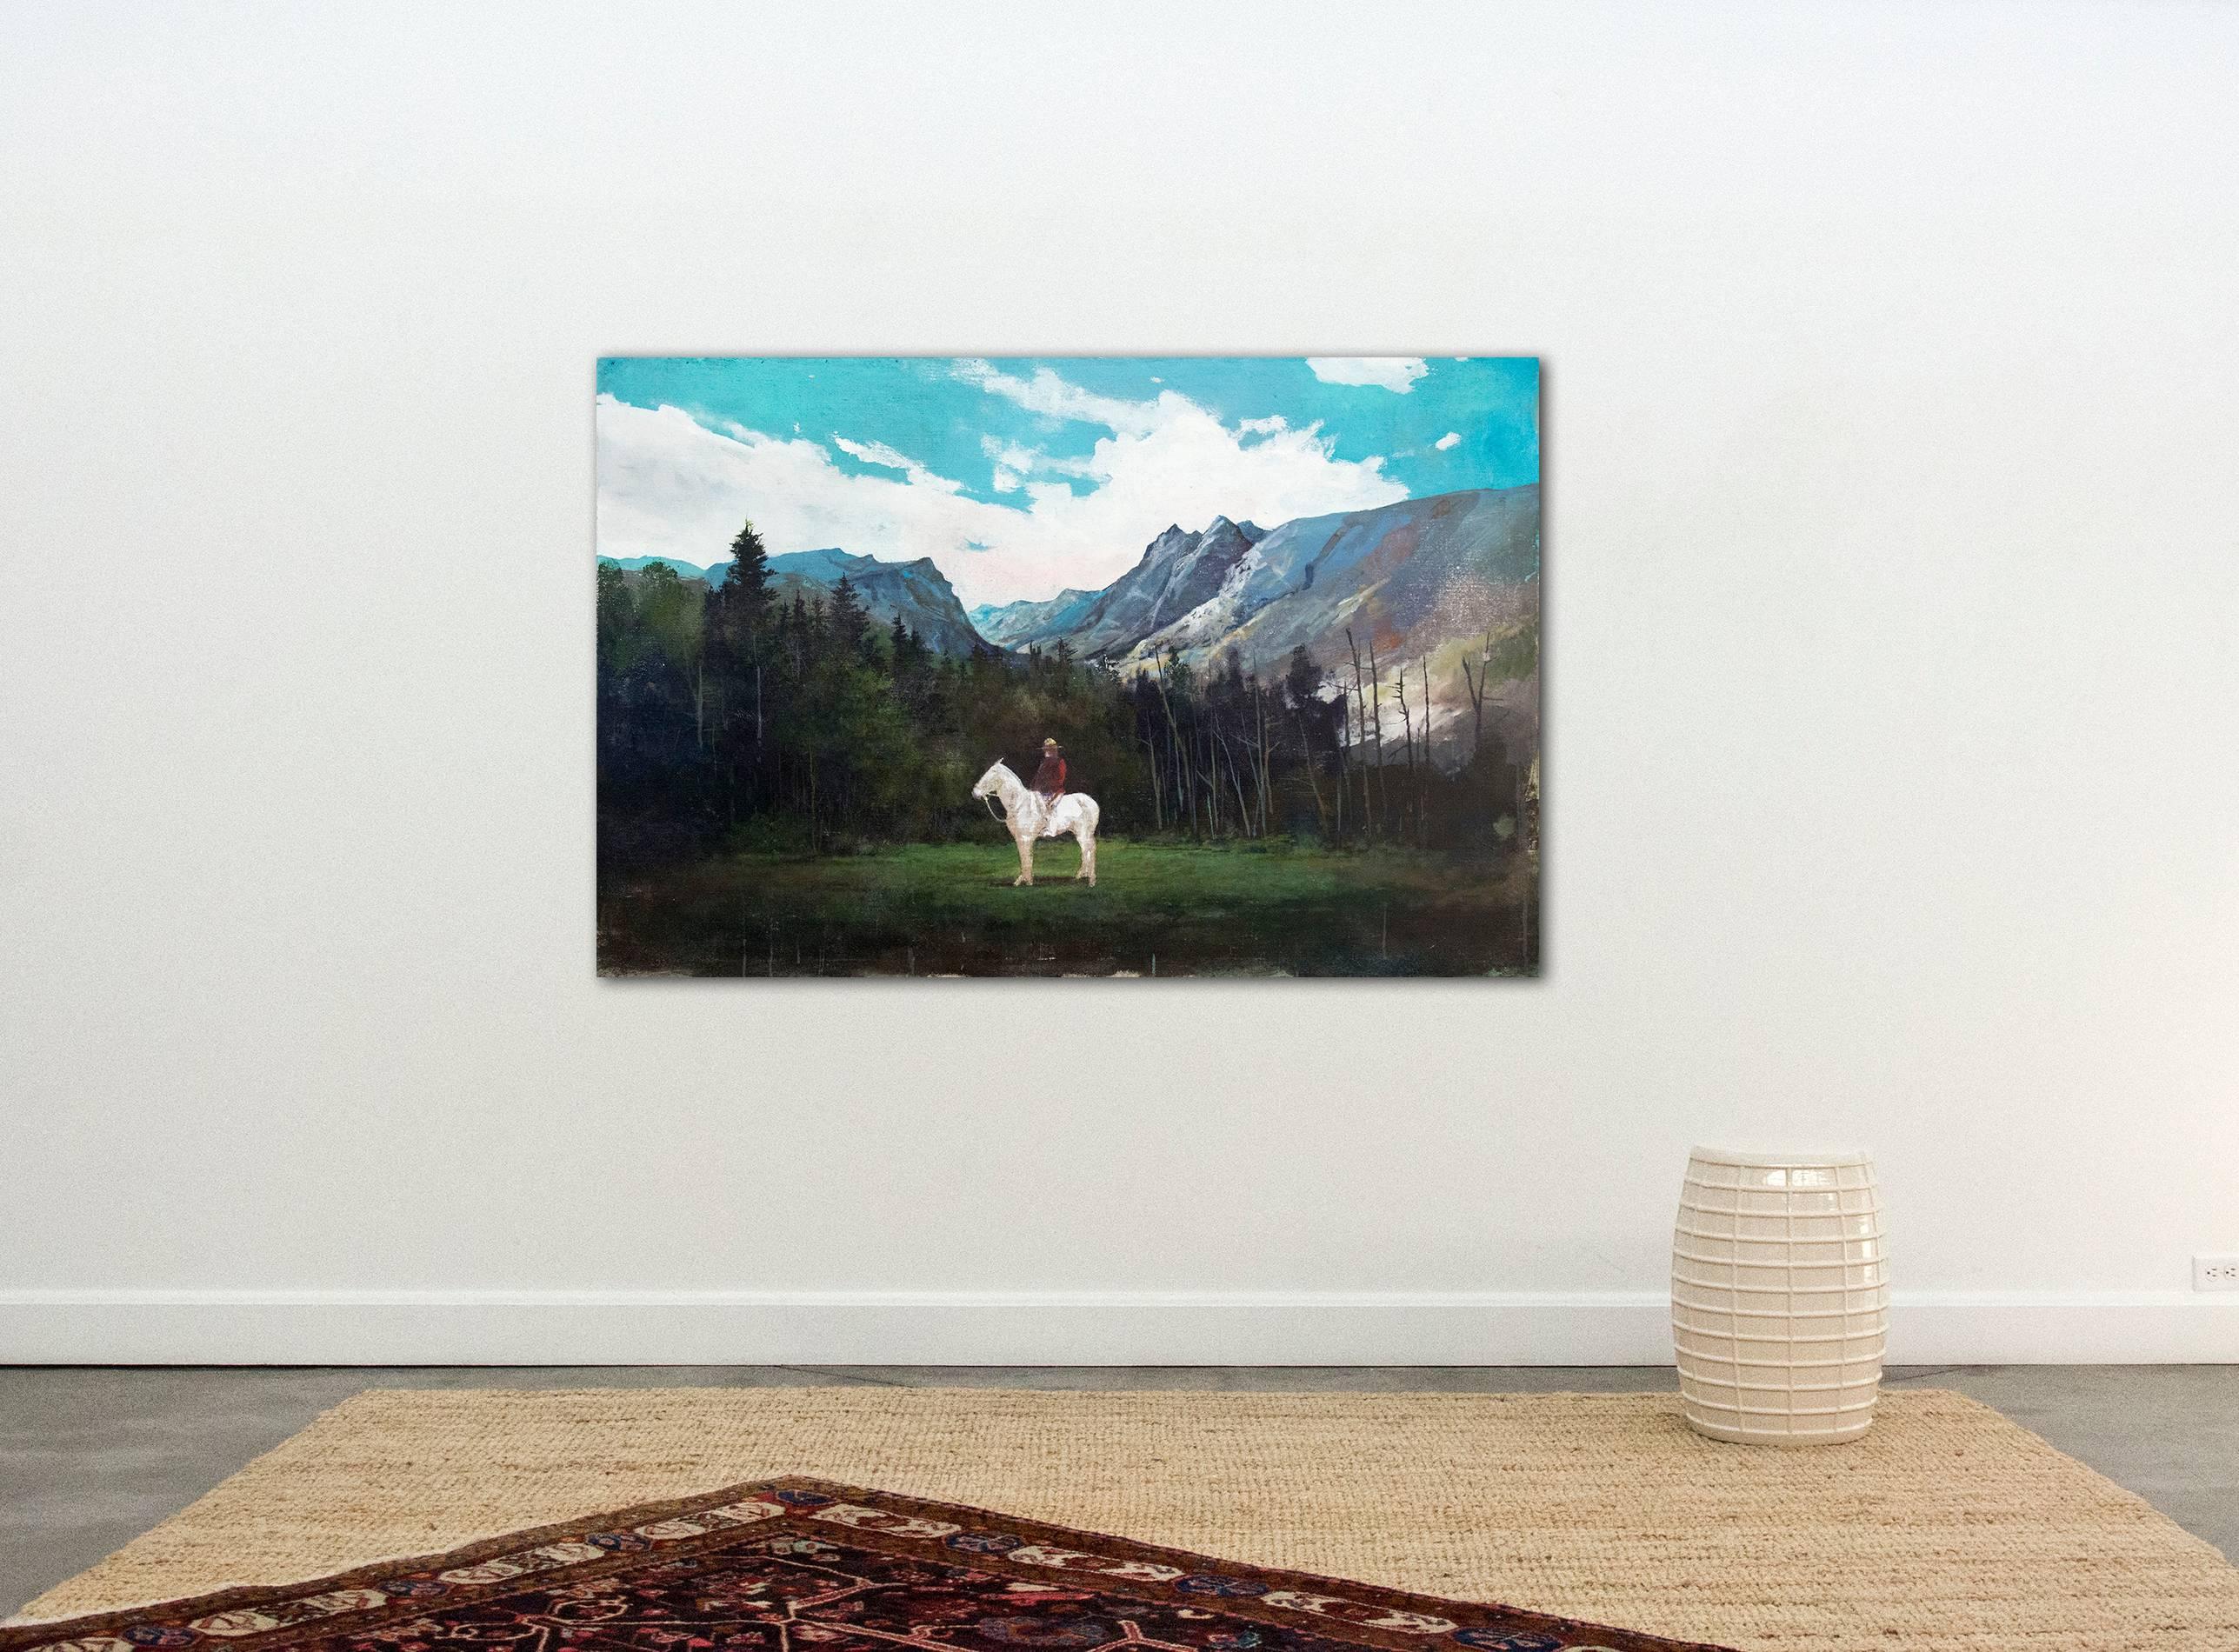 The iconic presence of a Mountie in red serge on a ghostly white horse is set against the backdrop of a mountain landscape. Peter Hoffer's epic paintings evoke nostalgia for classical, romantic forms and periods. Here he seems to look to the sublime